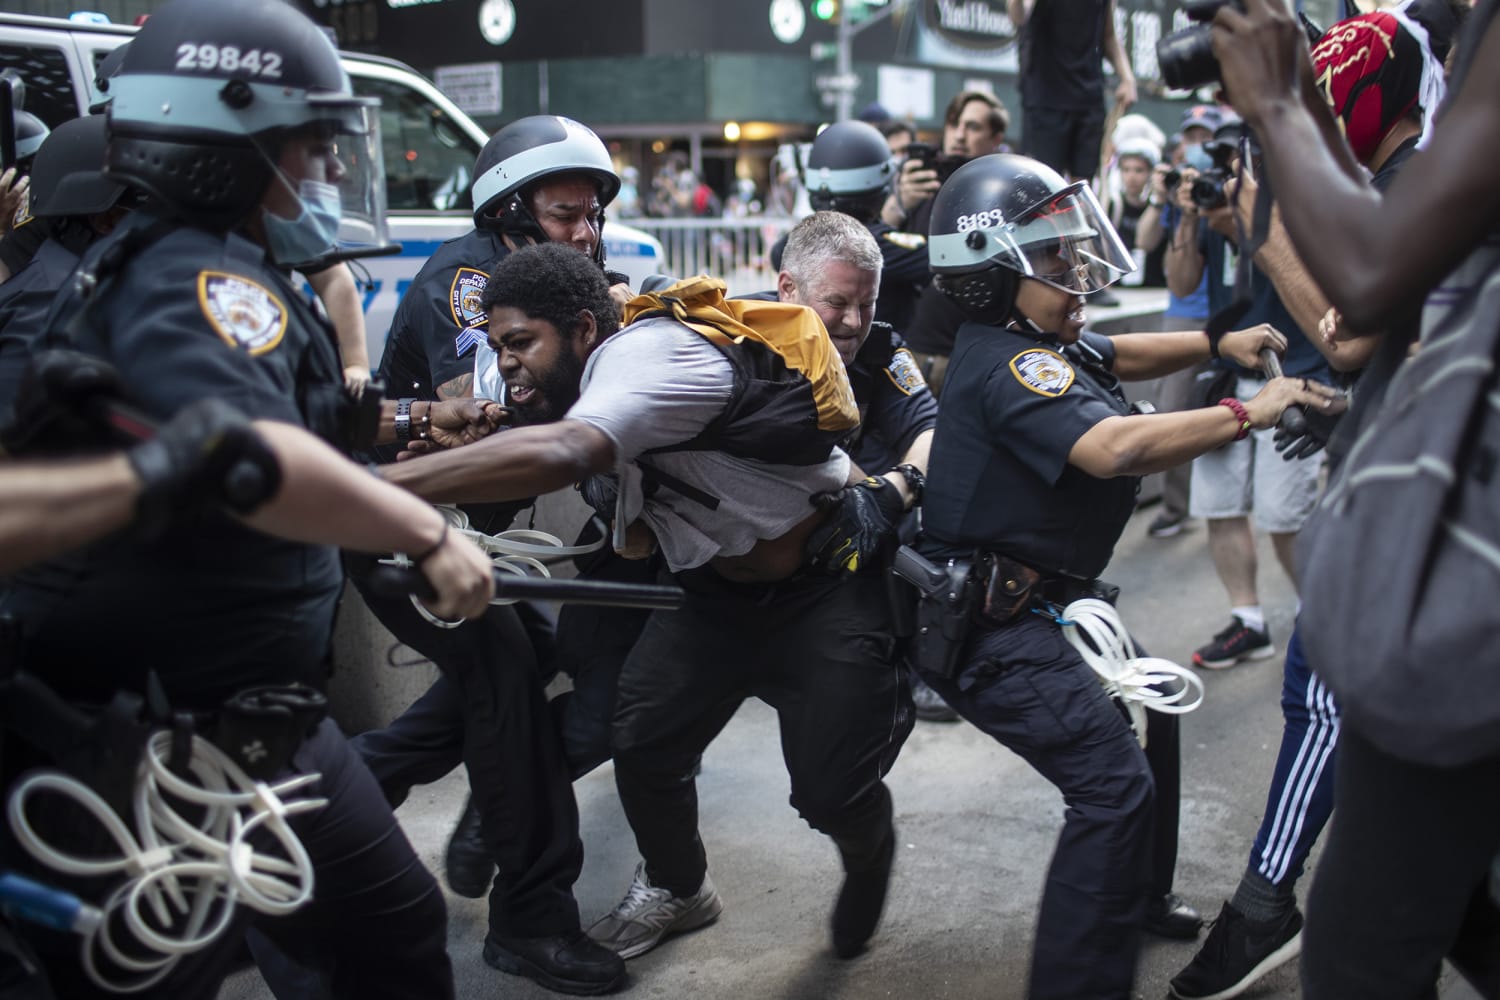 New York officers could face suspension after street clashes ...